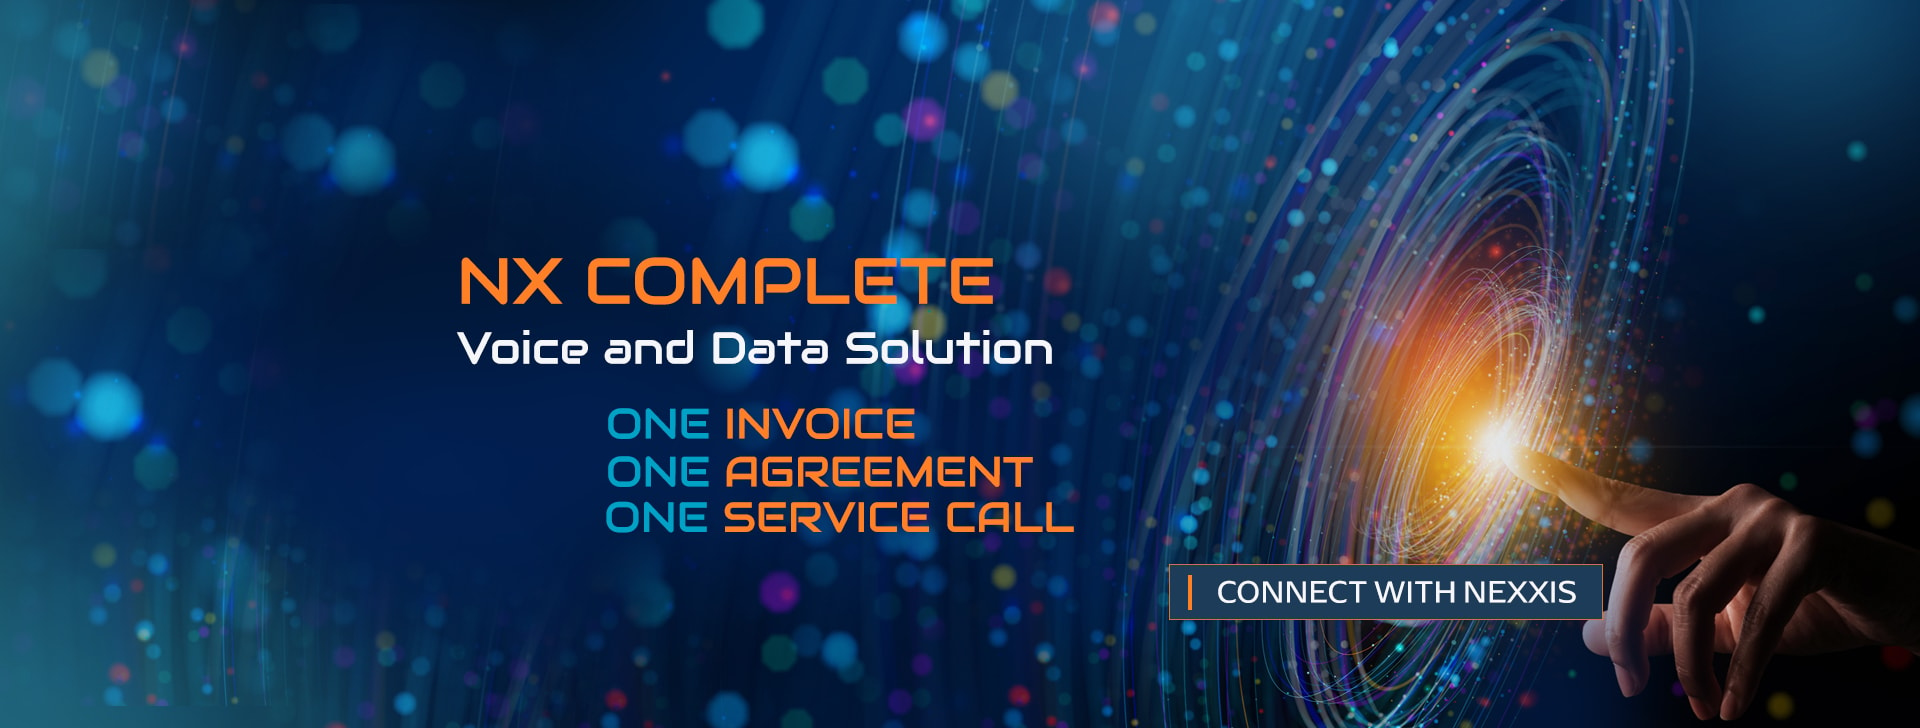 Complete Voice and Data Solution